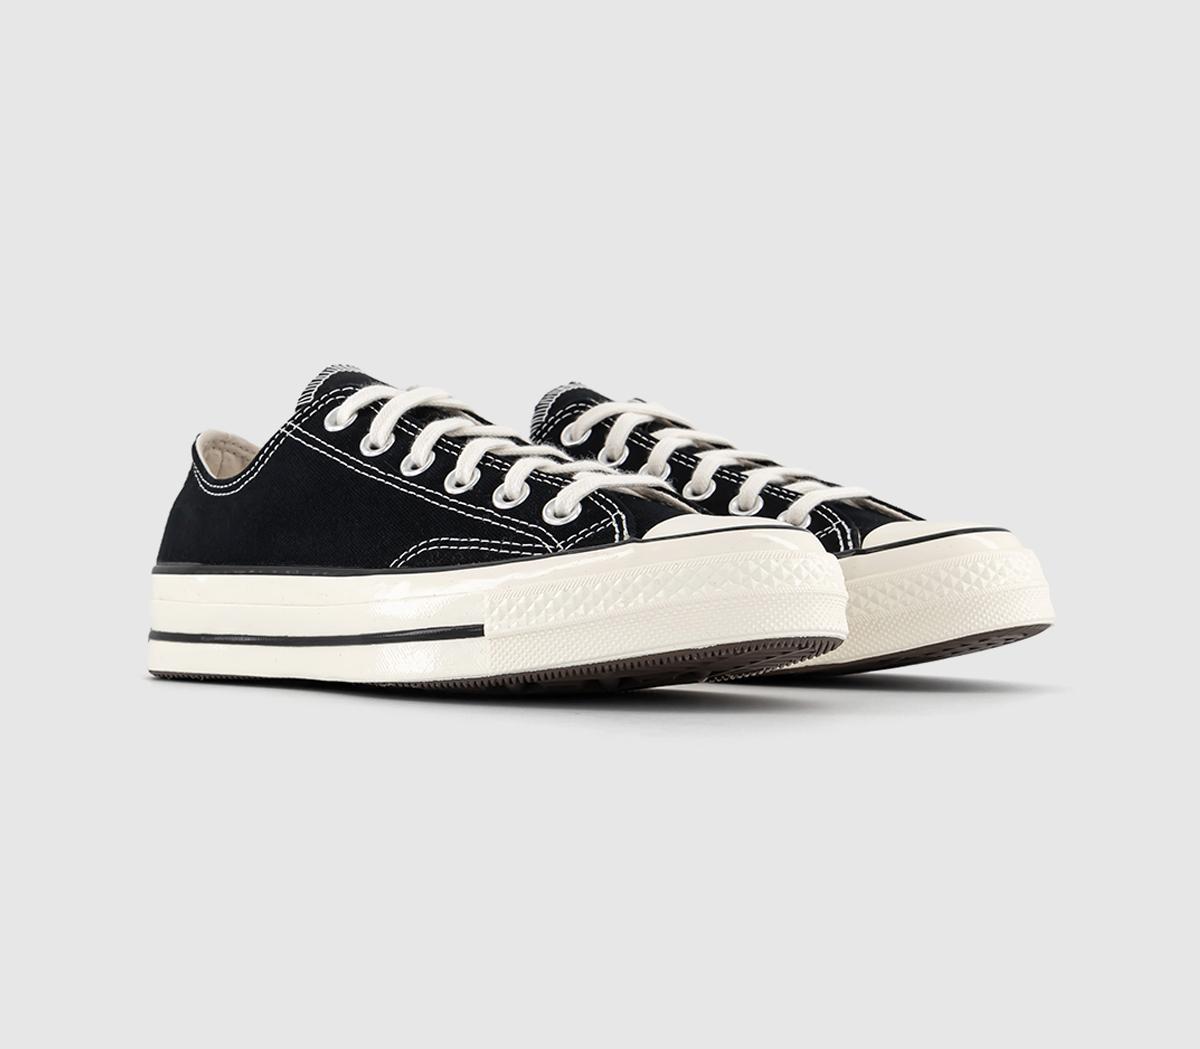 Converse All Star Ox 70s Trainers Black - His trainers